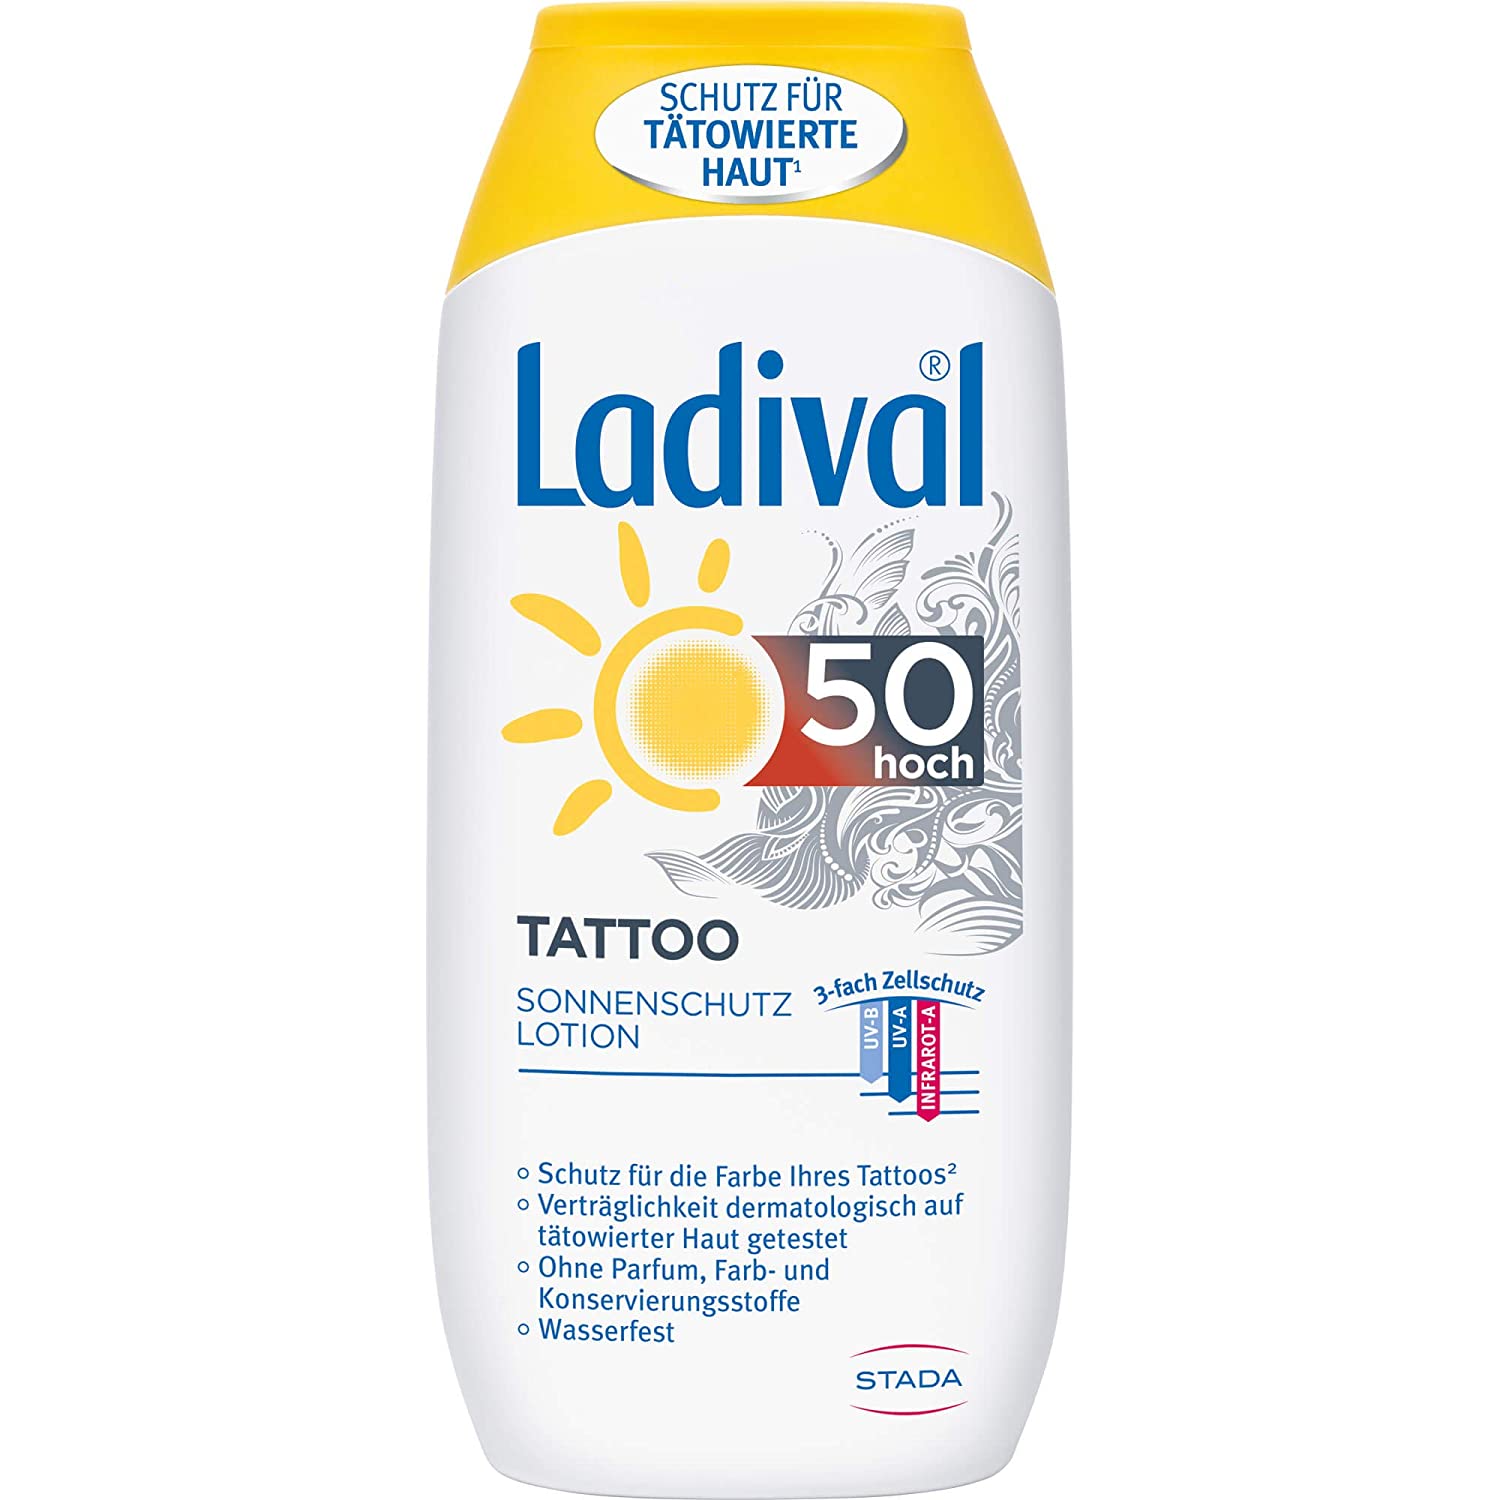 stada Ladival Tattoo Lotion SPF 50 - Protective Sun Lotion for Tattooed Skin - No PEG Emulsifiers, Silicone and Mineral Oil Free - 1 x 200 ml